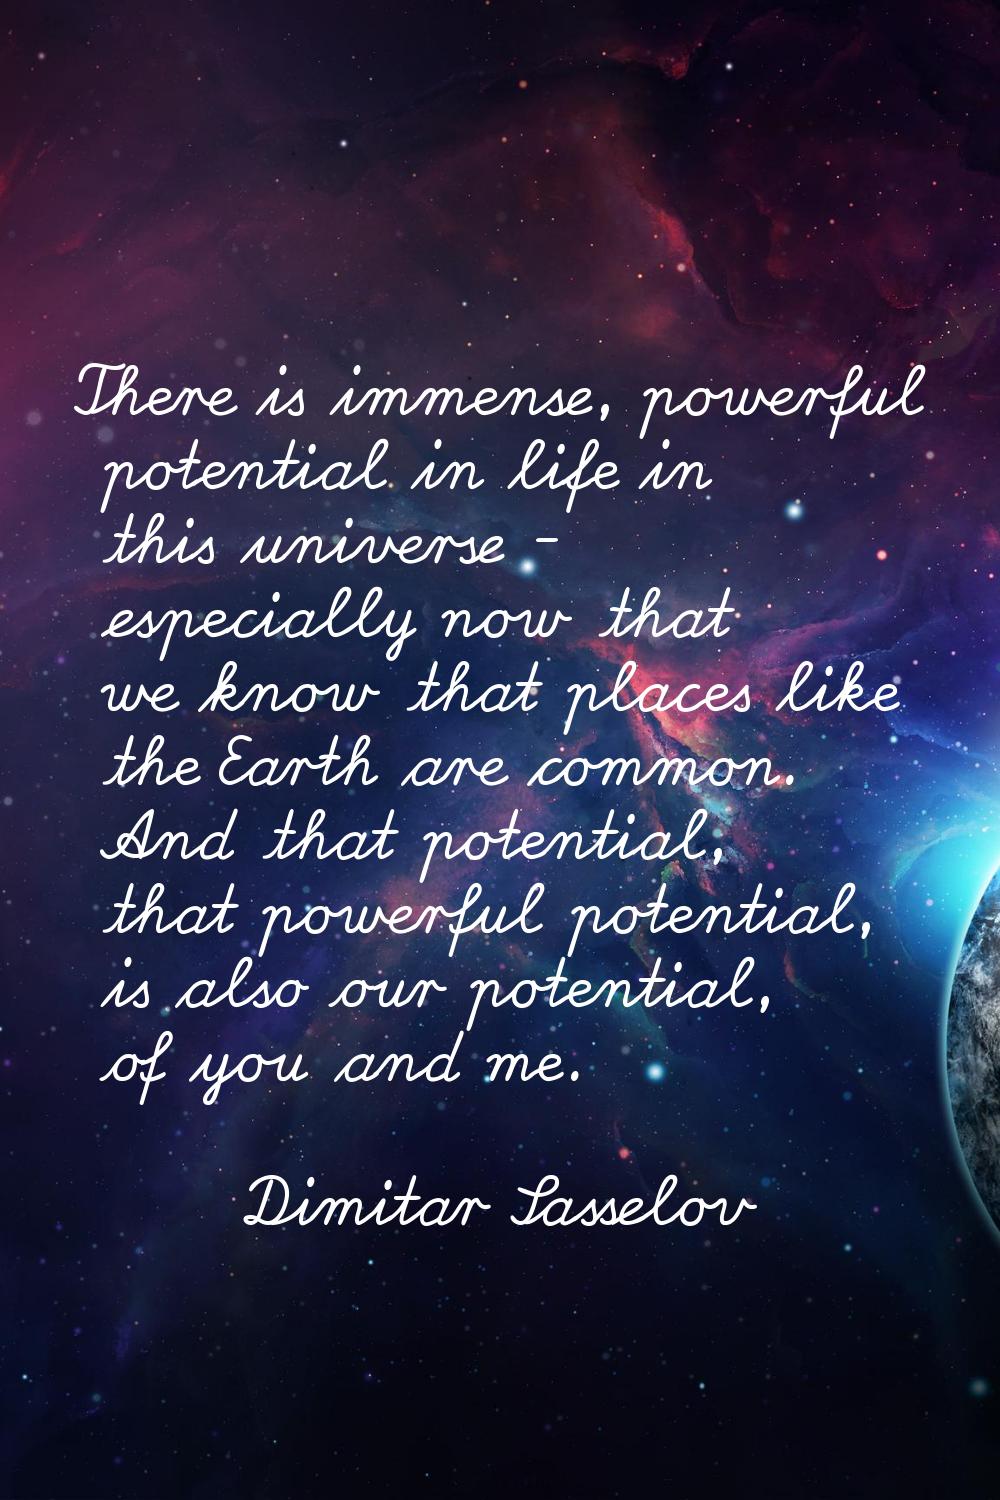 There is immense, powerful potential in life in this universe - especially now that we know that pl